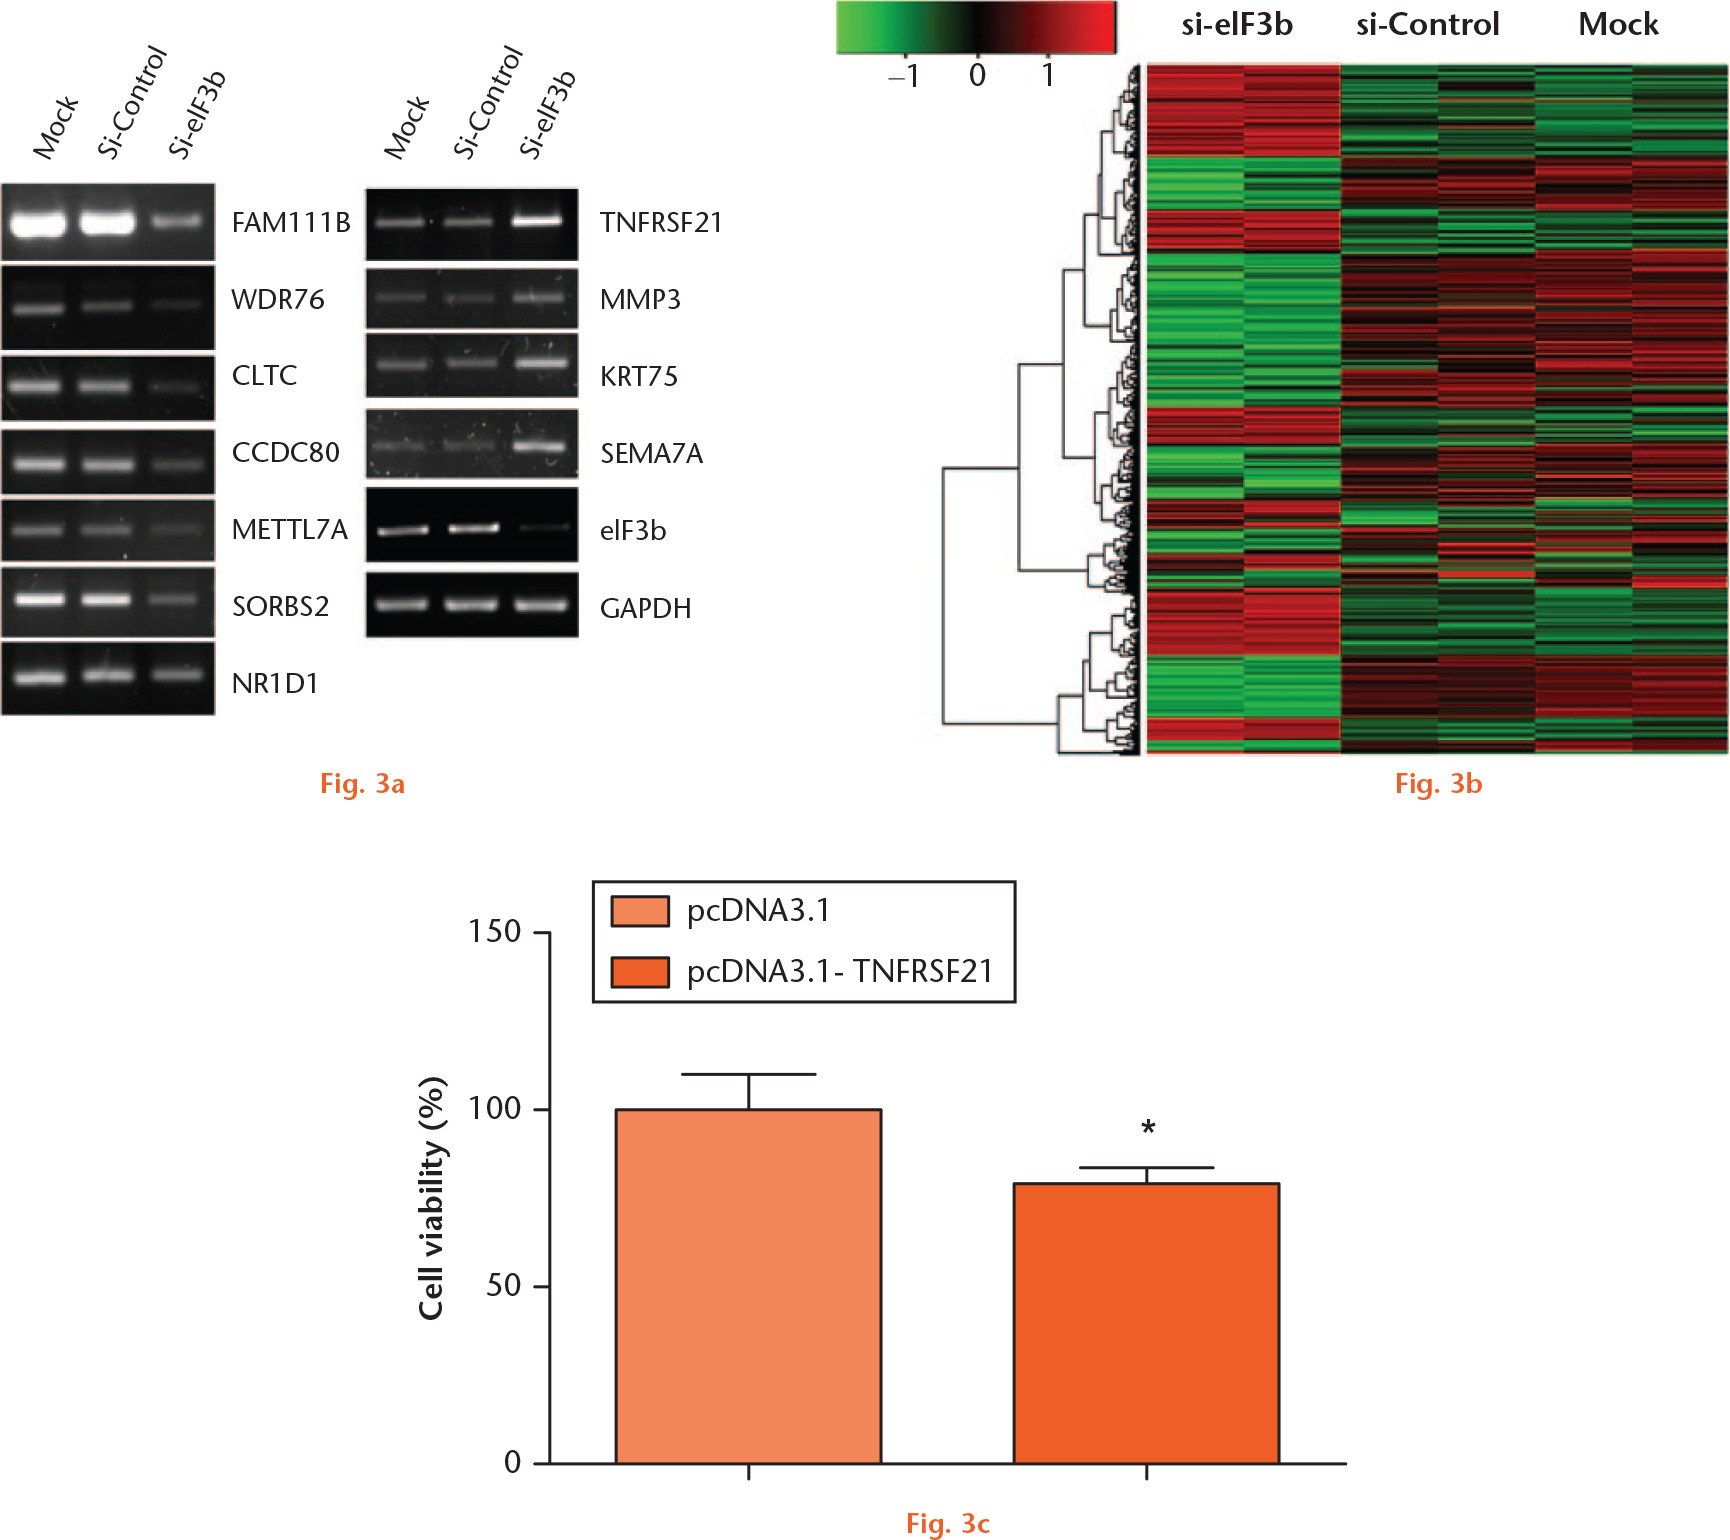  
            Gene expression profiling in U2OS cells in response to knockdown of eIF3b. a) Two days after transfection of eIF3b siRNA, RNA was isolated and subjected to microarray analysis (duplicates). b) The heat map of eIF3b siRNA-transfected U2OS cells demonstrated significantly up- and downregulated genes compared with control siRNA-transfected or untransfected cells. To validate gene expression profiles from the microarrays, semi-quantitative reverse transcription polymerase chain reaction was performed against the genes listed in Supplementary Table iv. c) U2OS cells were transfected with pcDNA3.1 or pcDNA3-TNFRSF21. Three days after transfection, cell viability was measured. (* p < 0.05 in two-tailed t-test).
          